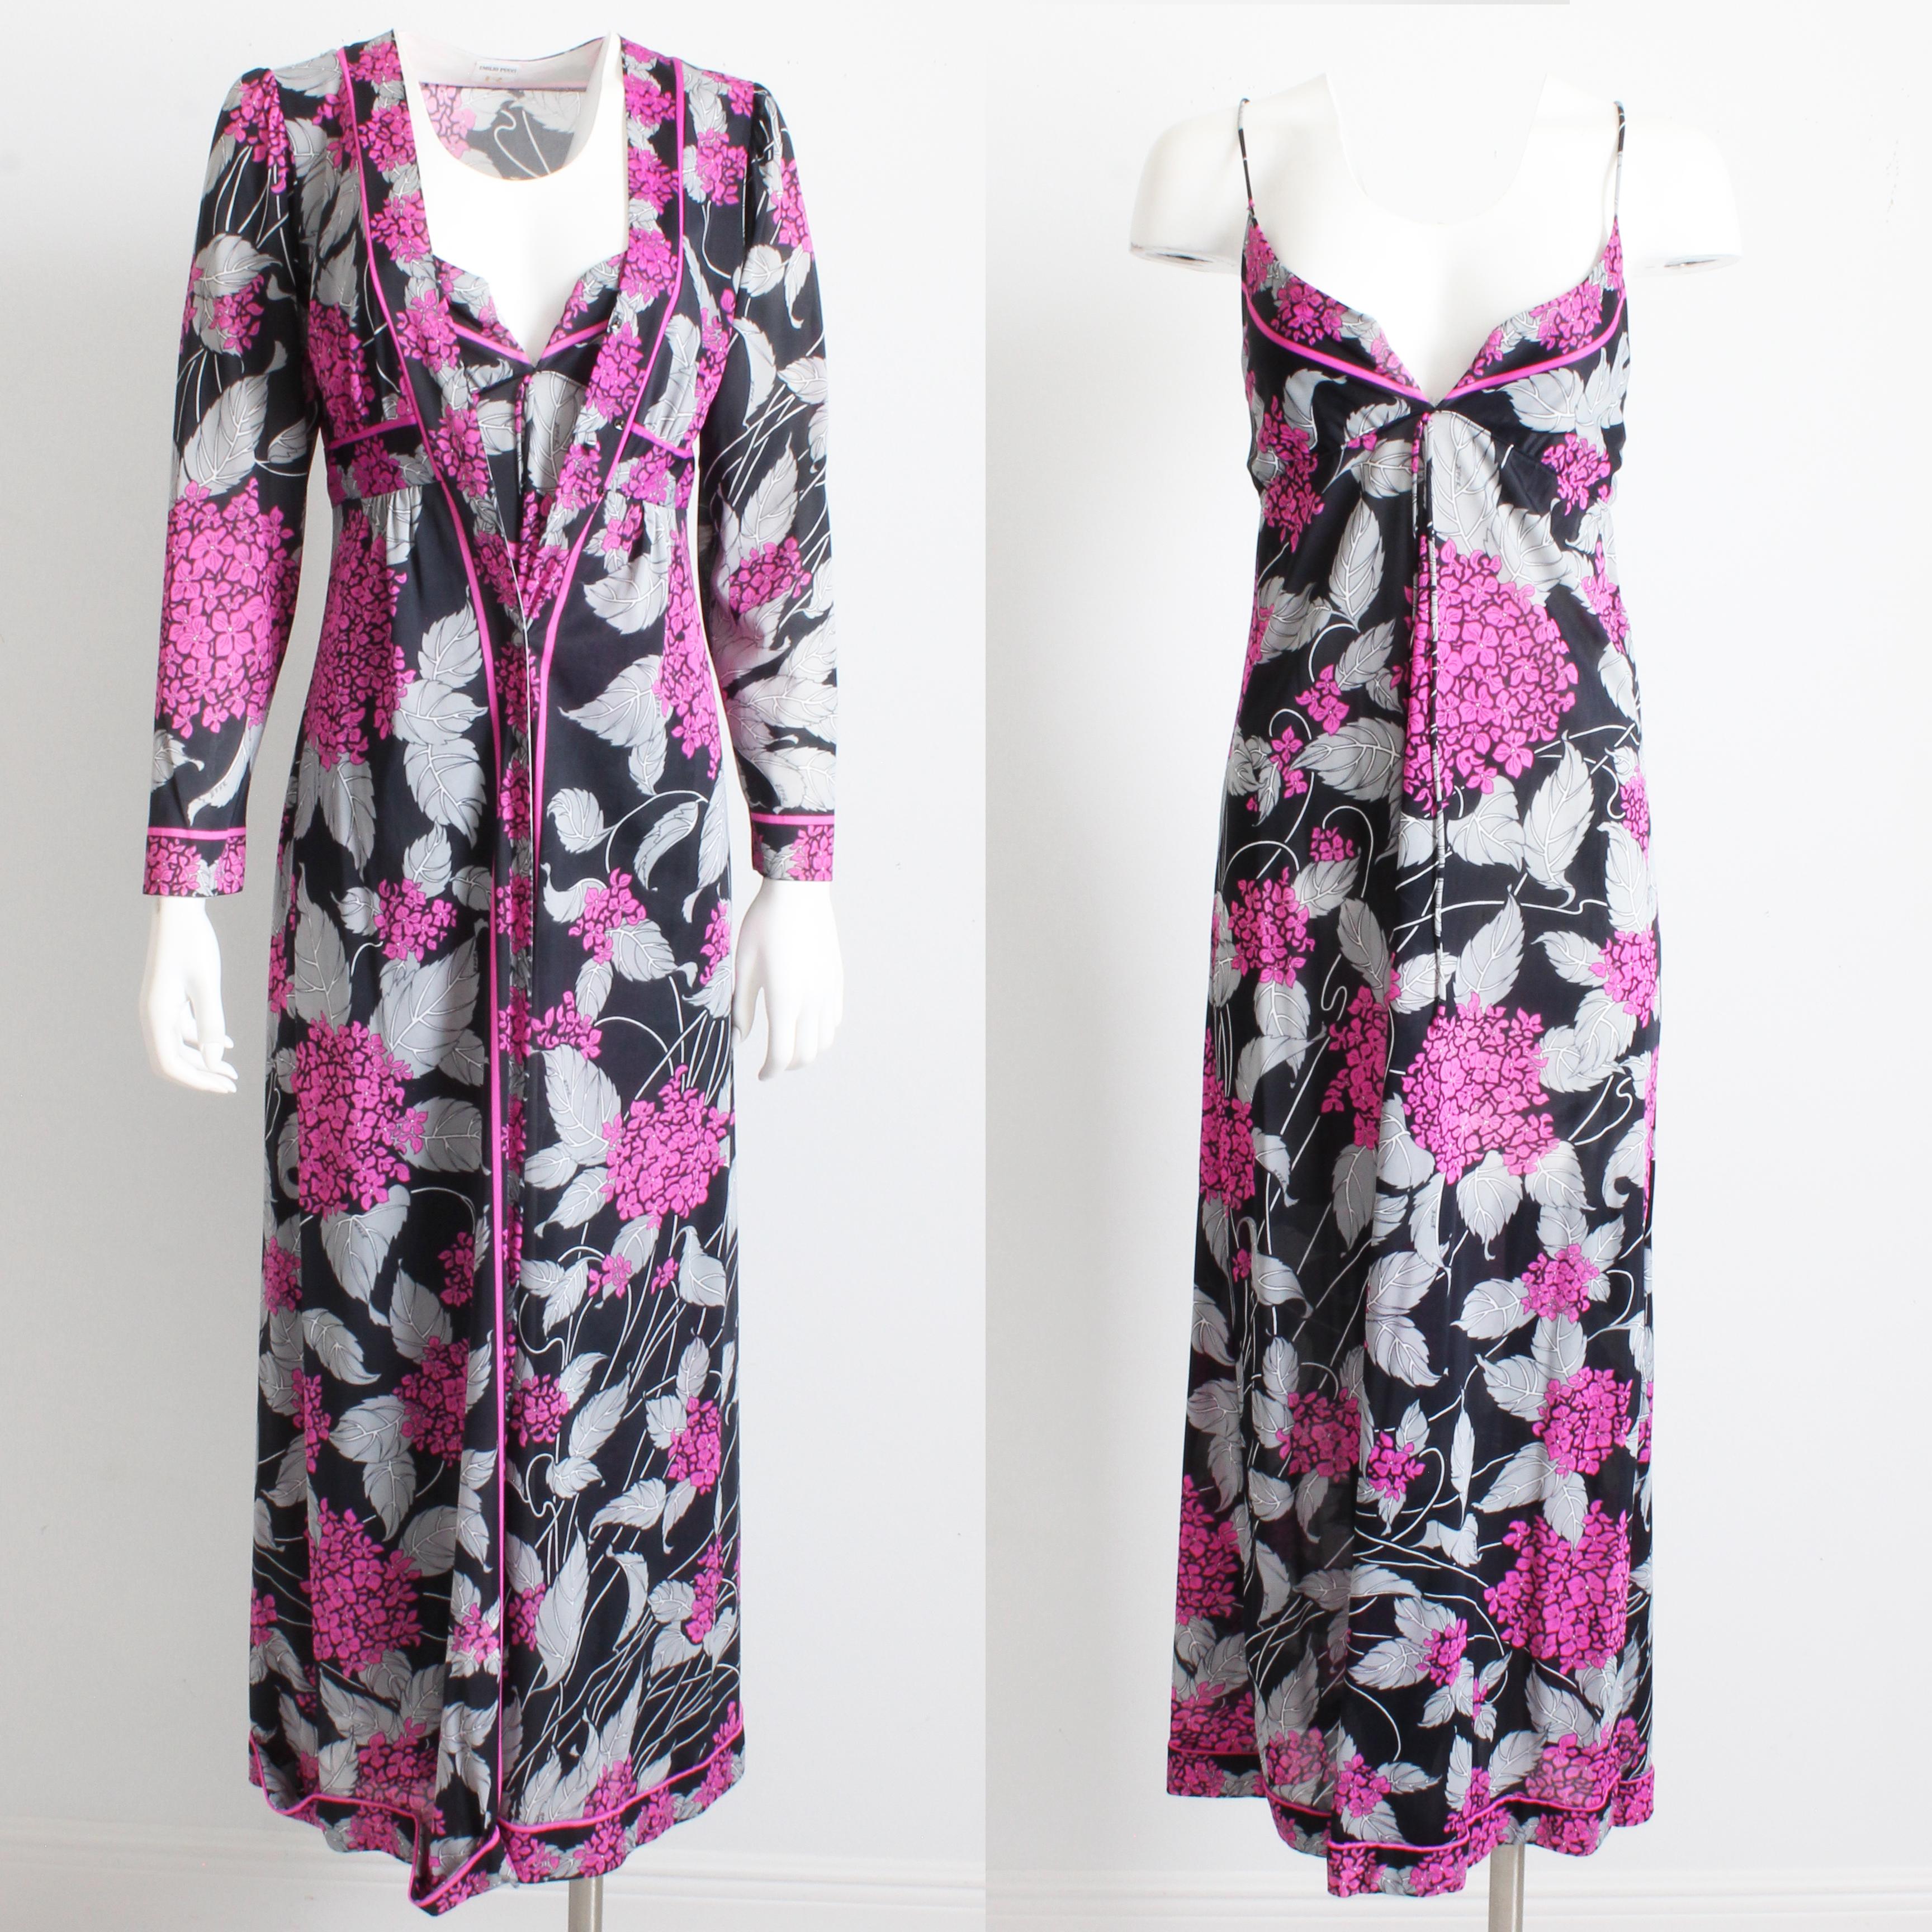 Authentic, preowned, vintage Emilio Pucci for Formfit Rogers Long Nightgown & Matching Robe 2pc Set Abstract Floral Print S/M. Unlined/Machine Wash. 

Jet set 2pc set that's comfortable to wear and looks super chic, too! 

No size tag, fits like M.